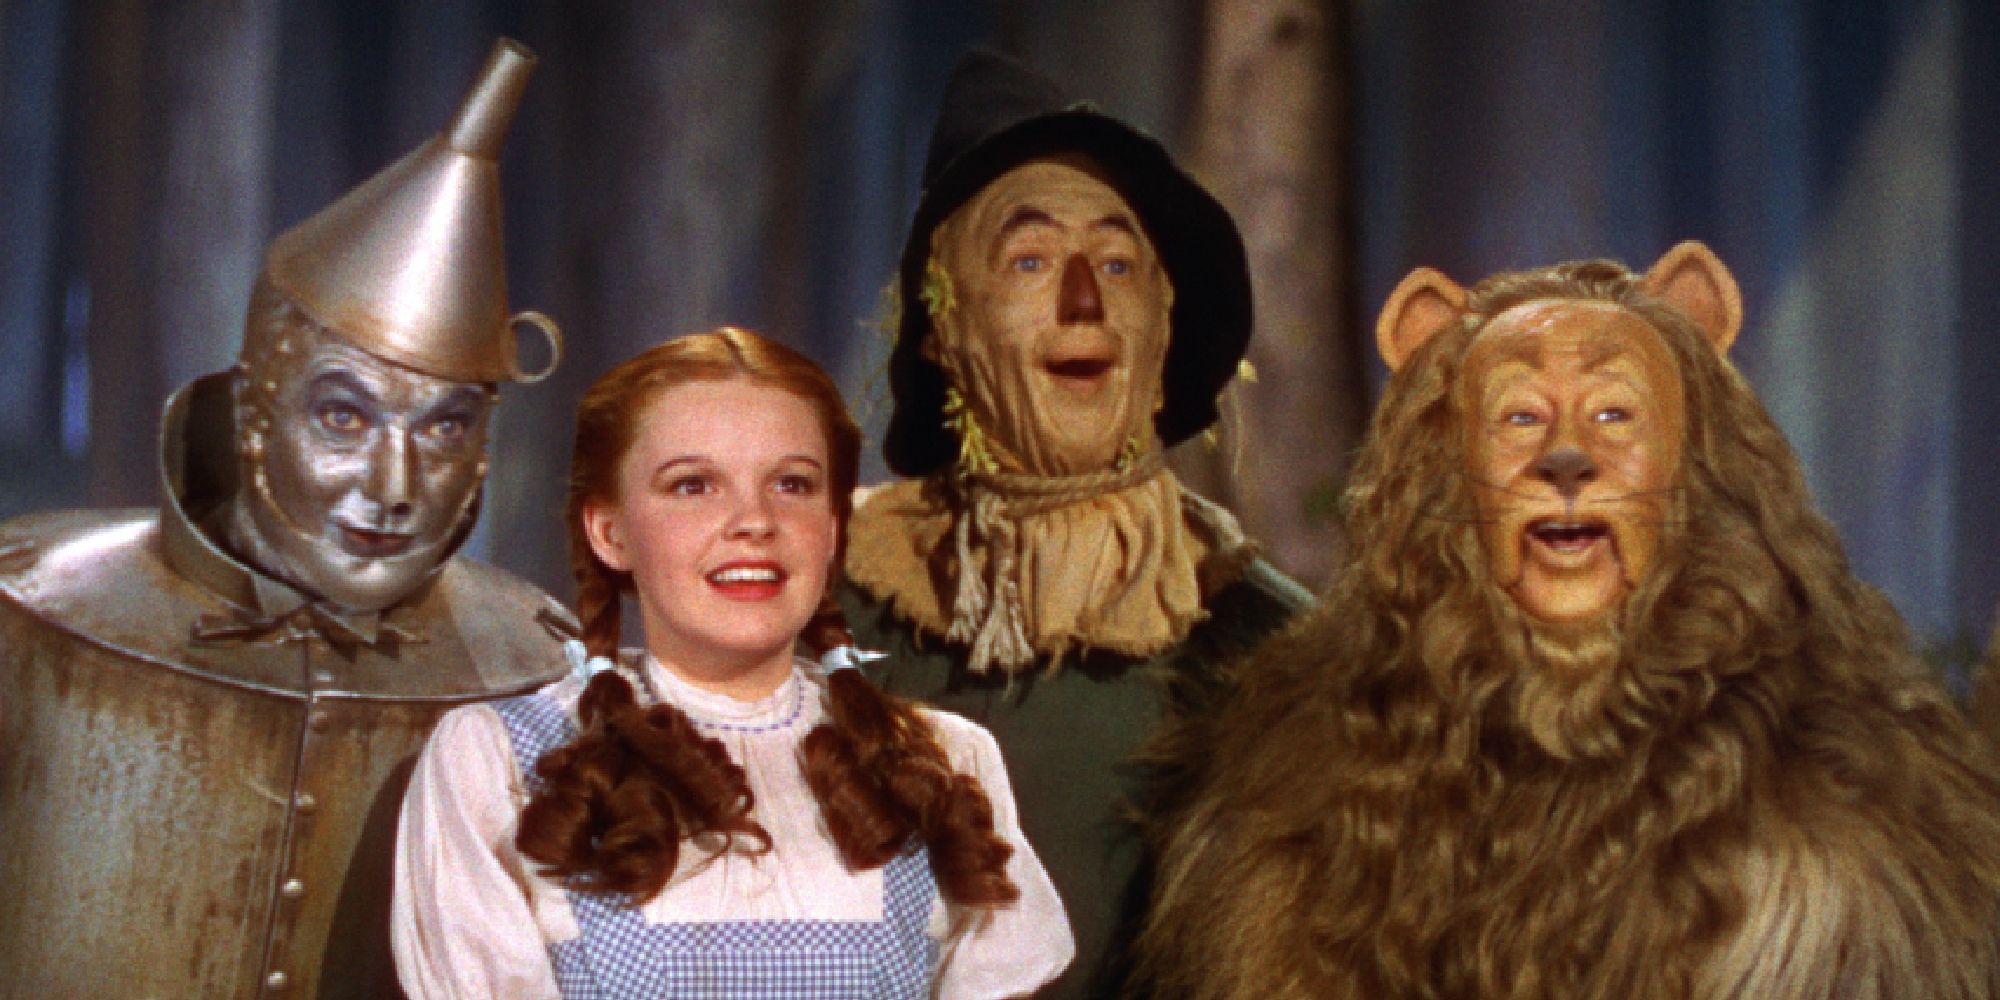 Dorothy (Judy Garland), the Scarecrow (Ray Bolger), the Tin Man (Jack Haley) and the Cowardly Lion (Bert Lahr) smiling in The Wizard of Oz